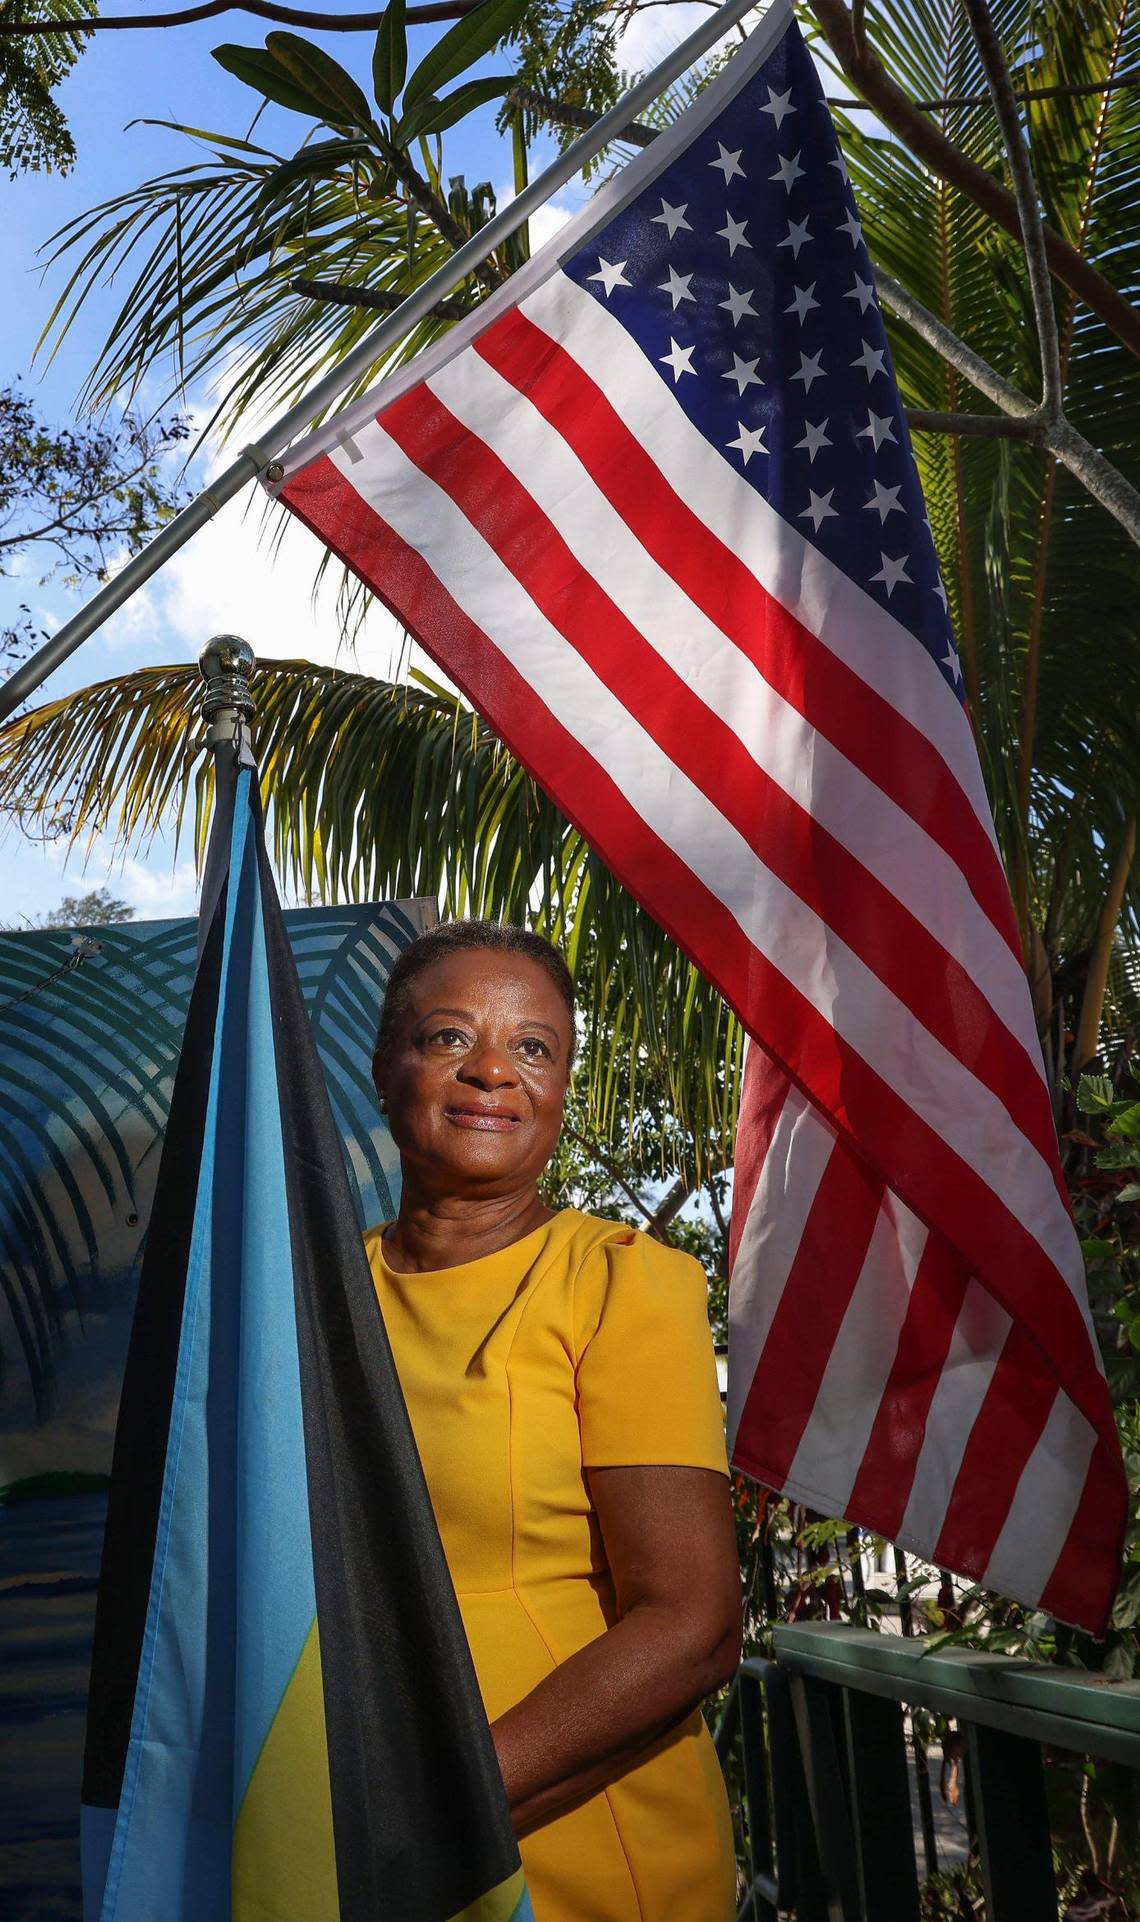 On Wednesday, Feb. 1, 2023, resident and preservationist Helen Gage stands outside the Bethel House, a Bahamian-American museum, which she helped save back in 1995.